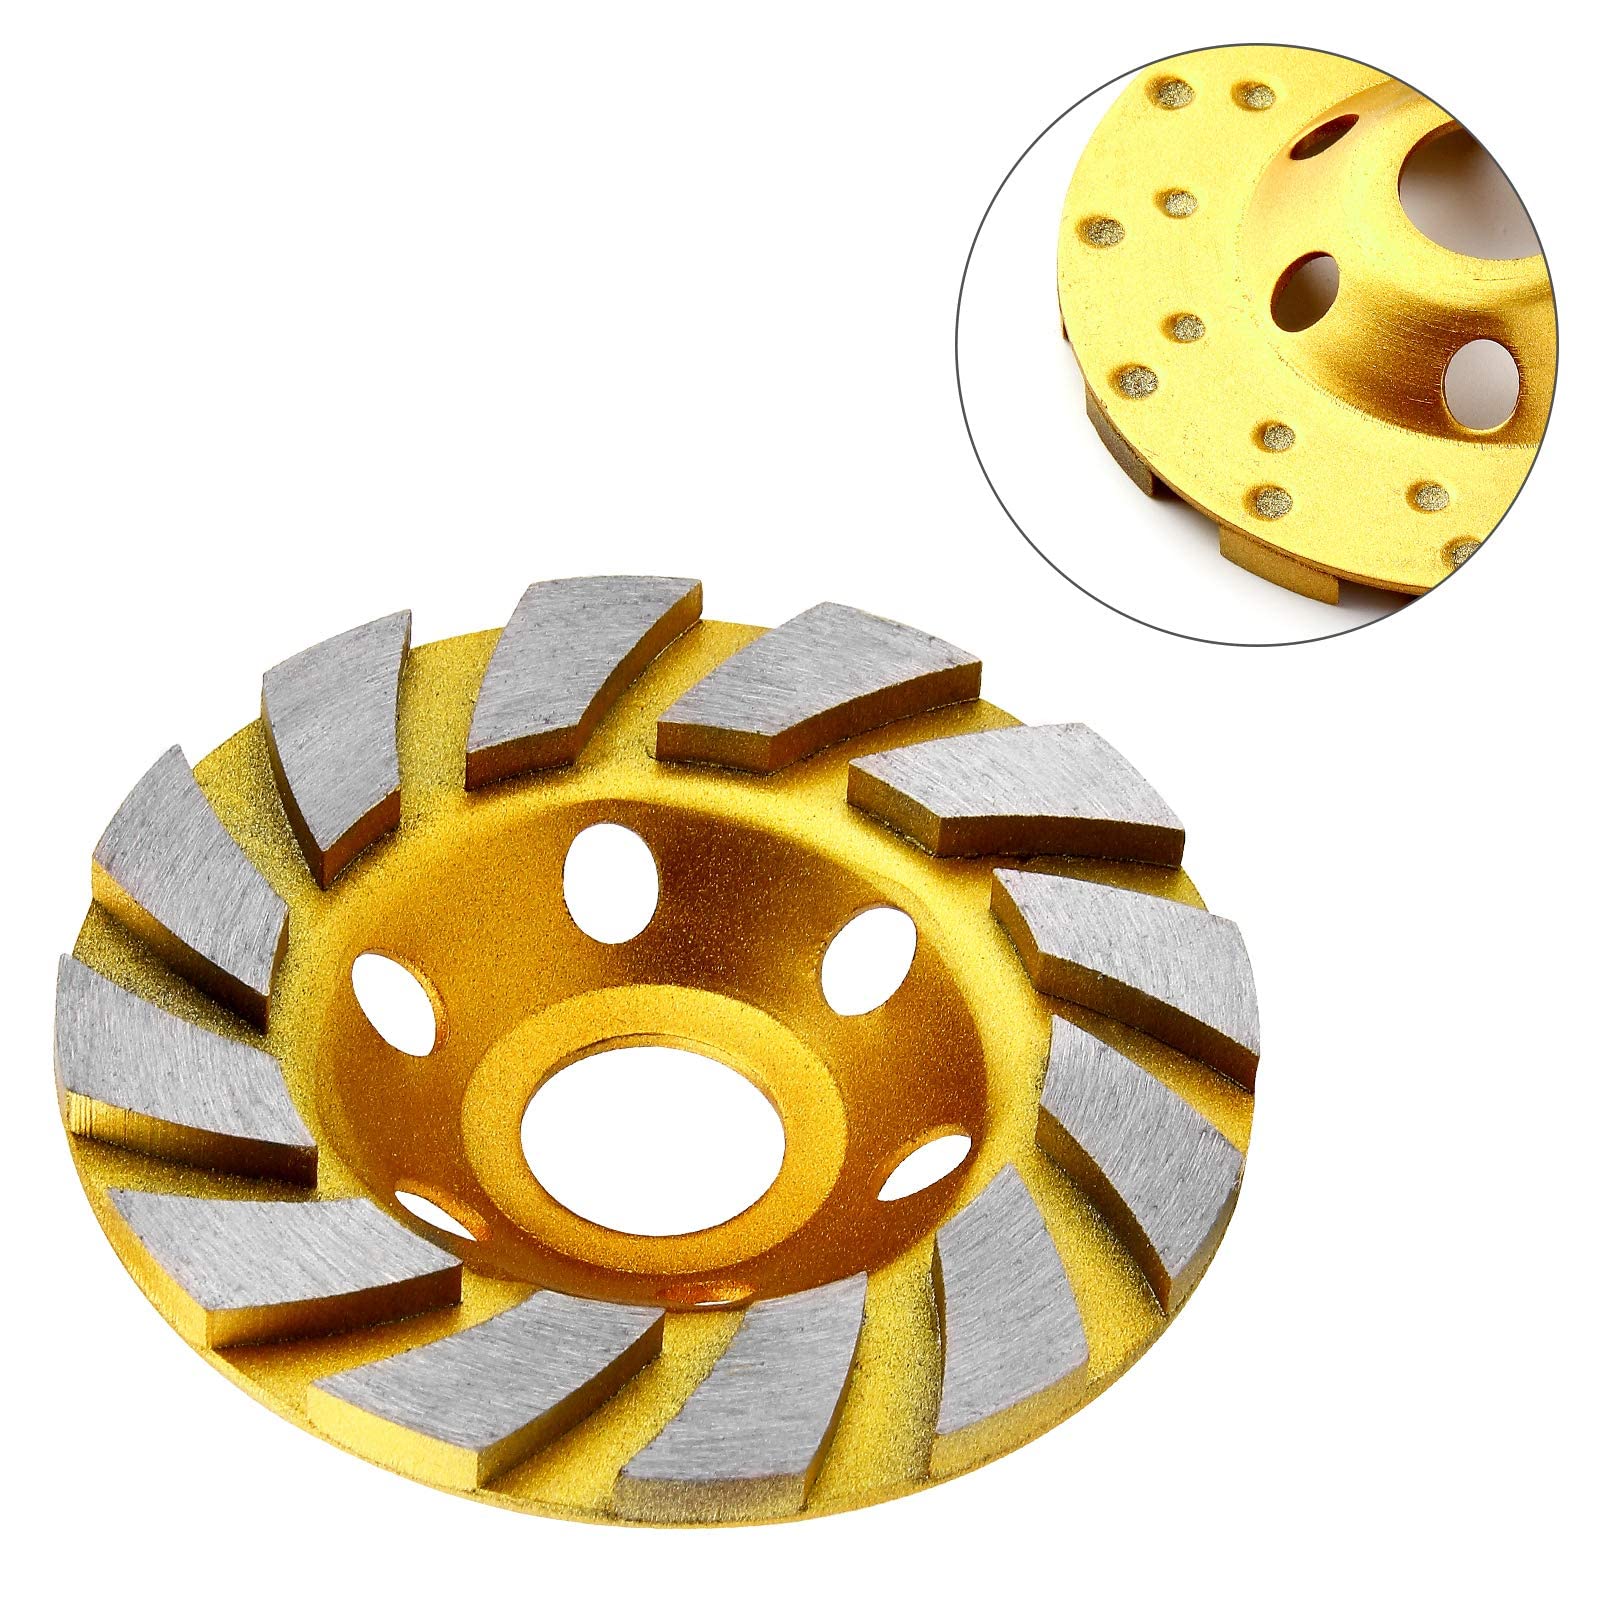 2 Pieces 4 Inch Concrete Stone Ceramic Turbo Diamond Grinding Cup Wheel,12 Segs Heavy Duty Angle Grinder Wheels for Angle Grinder (Yellow)